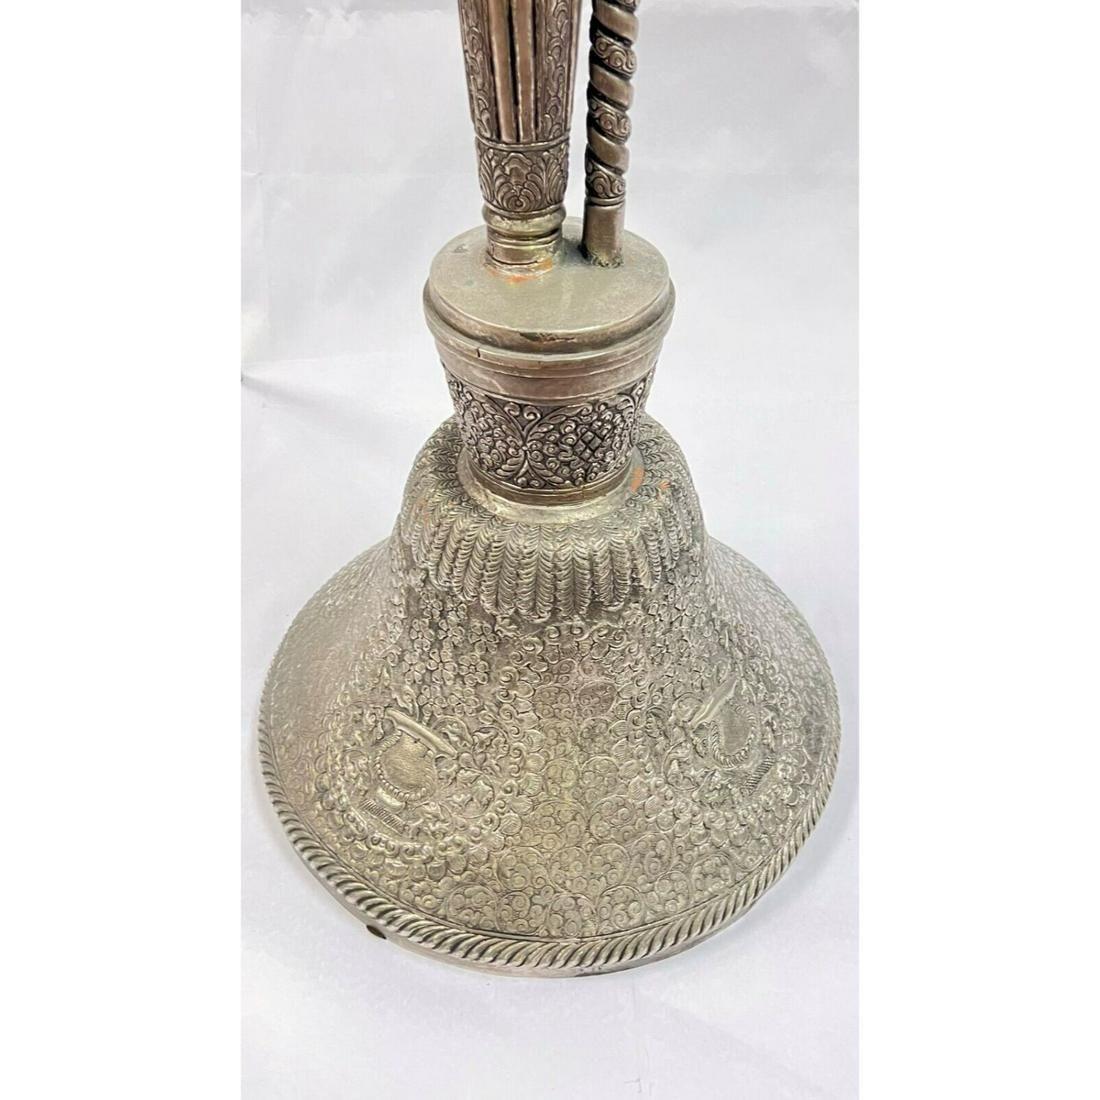 Very large (52 in, 132 cm) silverplate hookah with exceptional repousse designs.